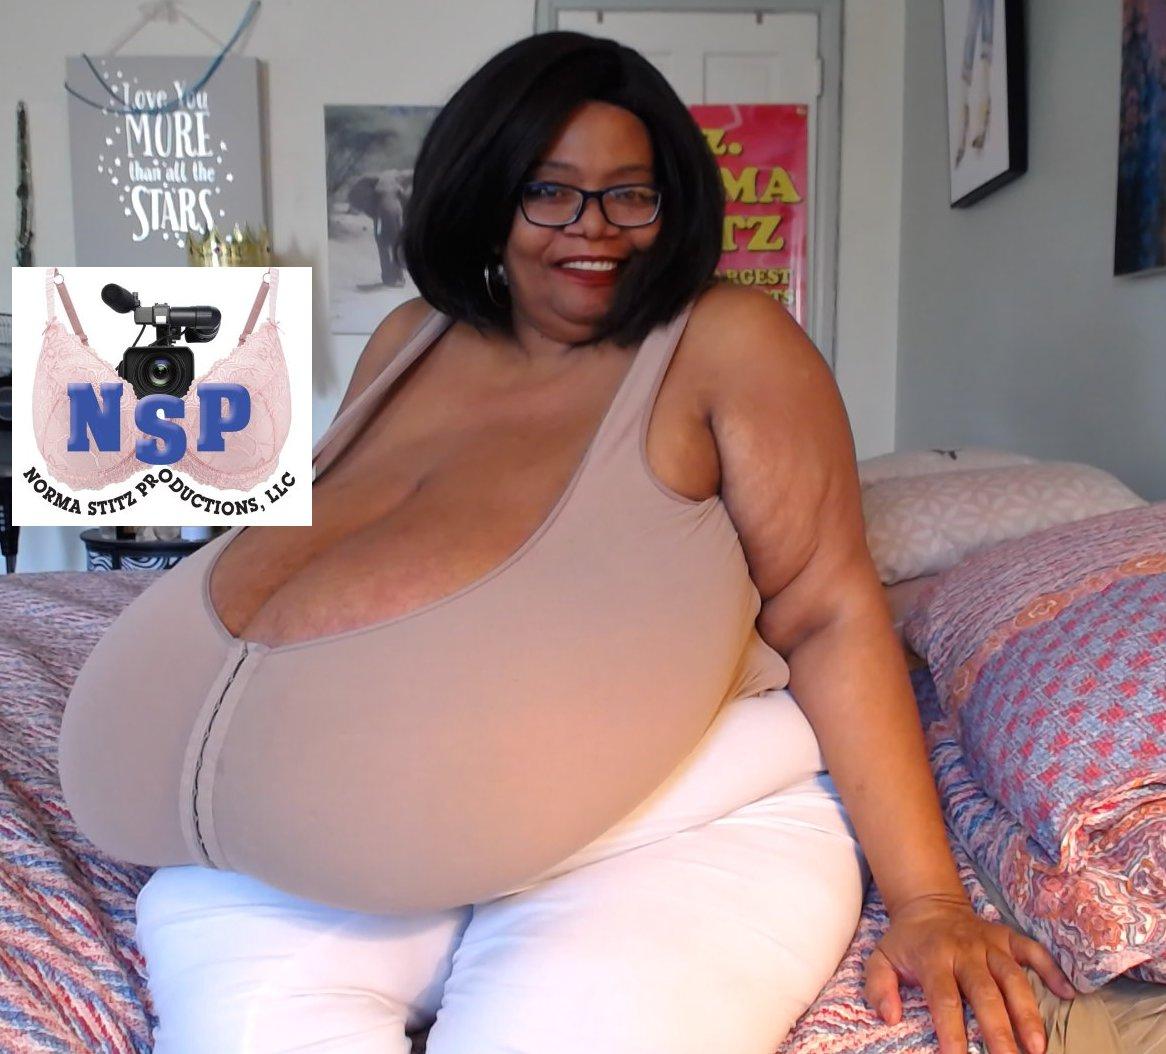 Norma Stitz Blowjob Photos And Other Amusements Trends Porn F